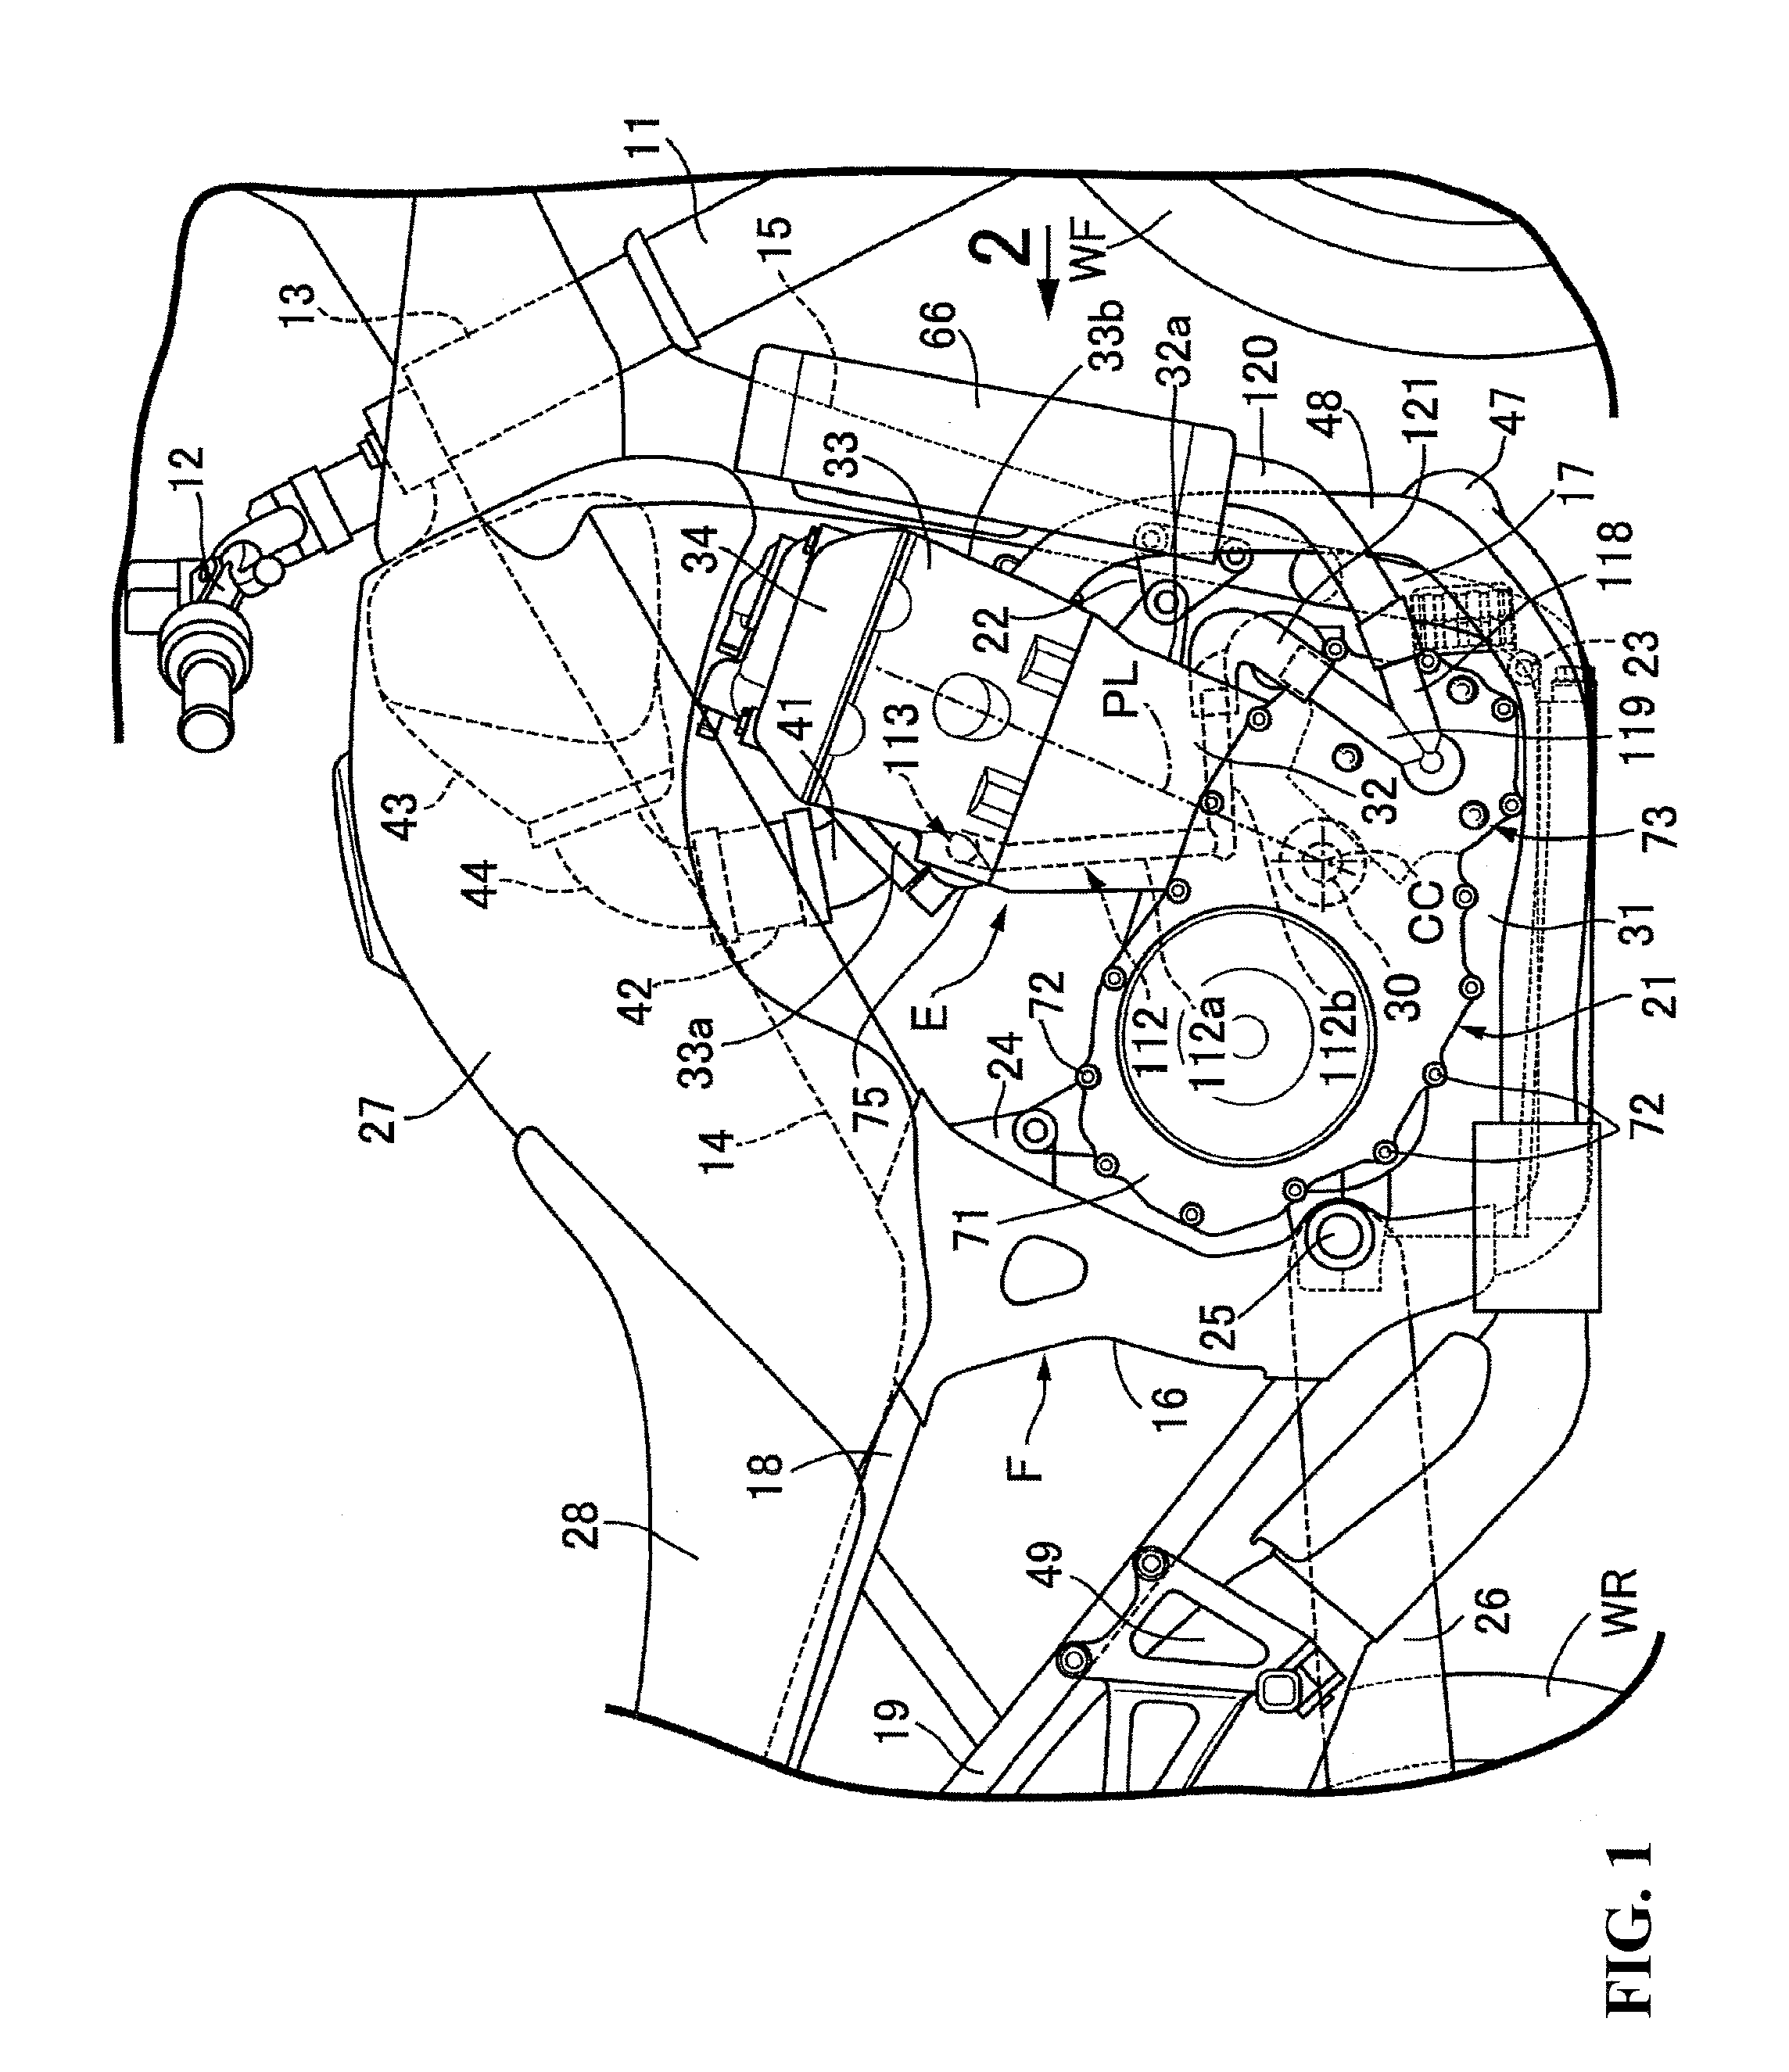 Water cooled internal combustion engine for vehicle